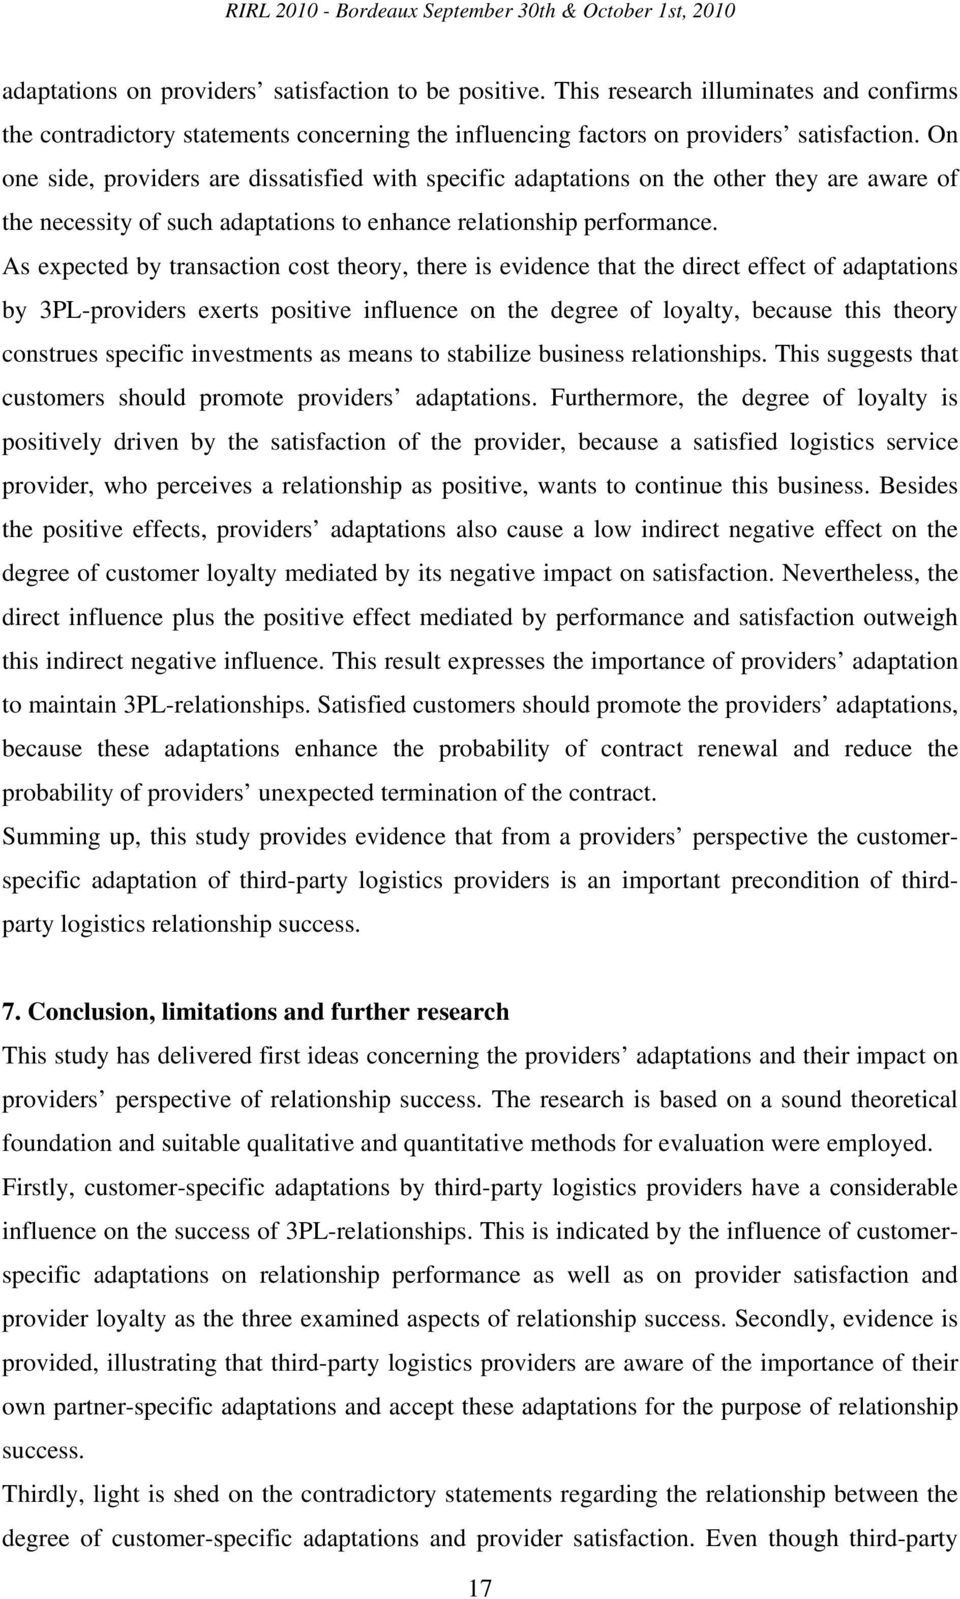 As expected by transaction cost theory, there is evidence that the direct effect of adaptations by 3PL-providers exerts positive influence on the degree of loyalty, because this theory construes